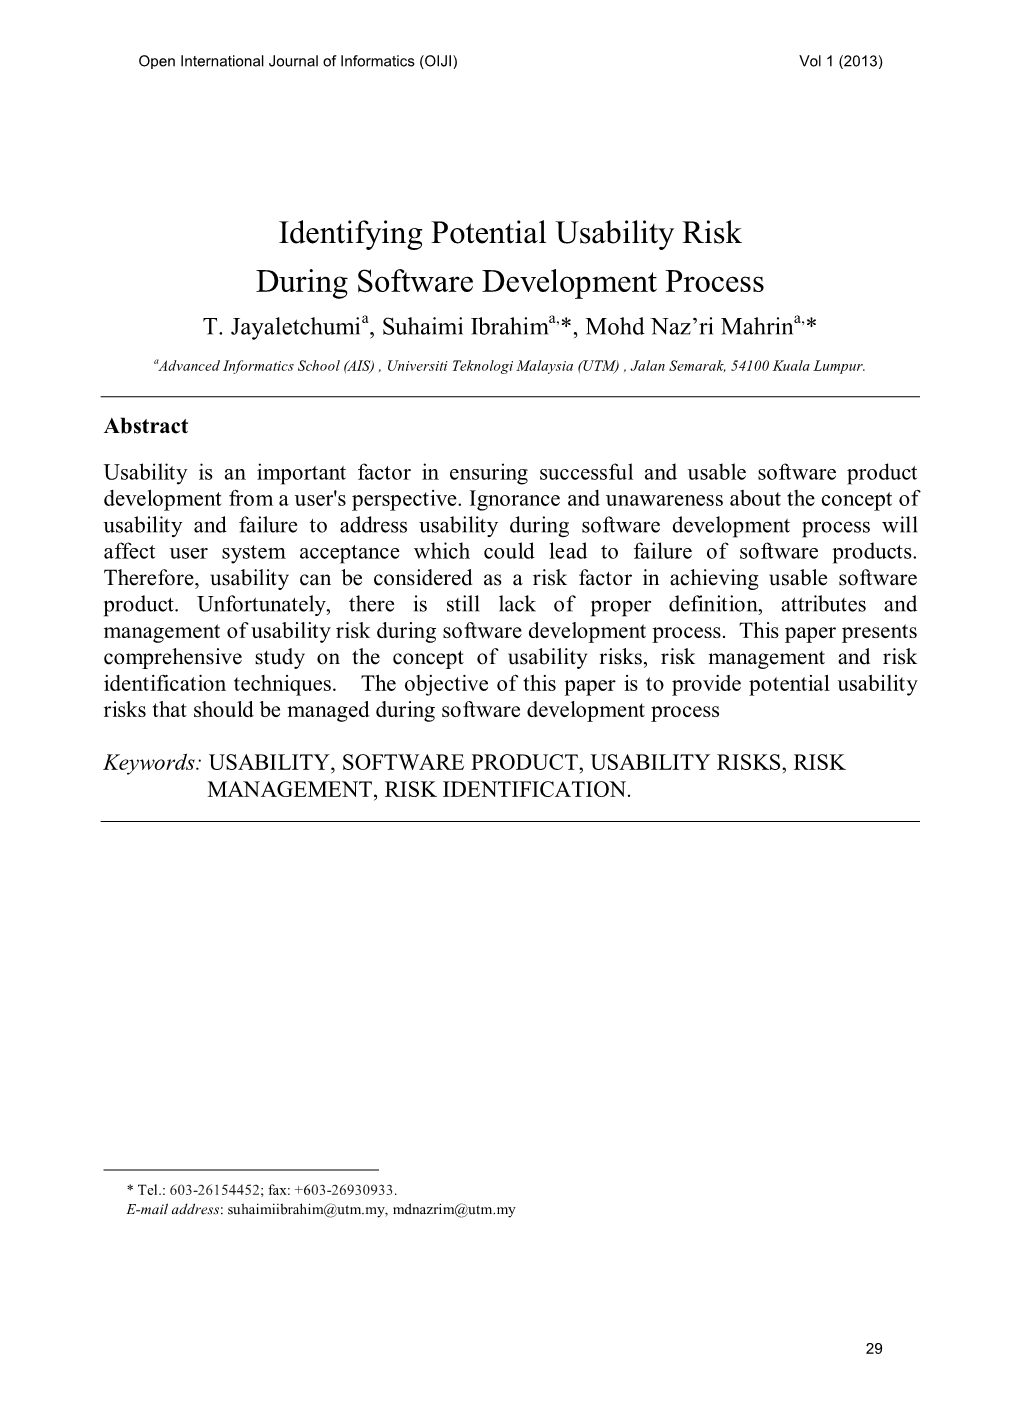 Identifying Potential Usability Risk During Software Development Process T